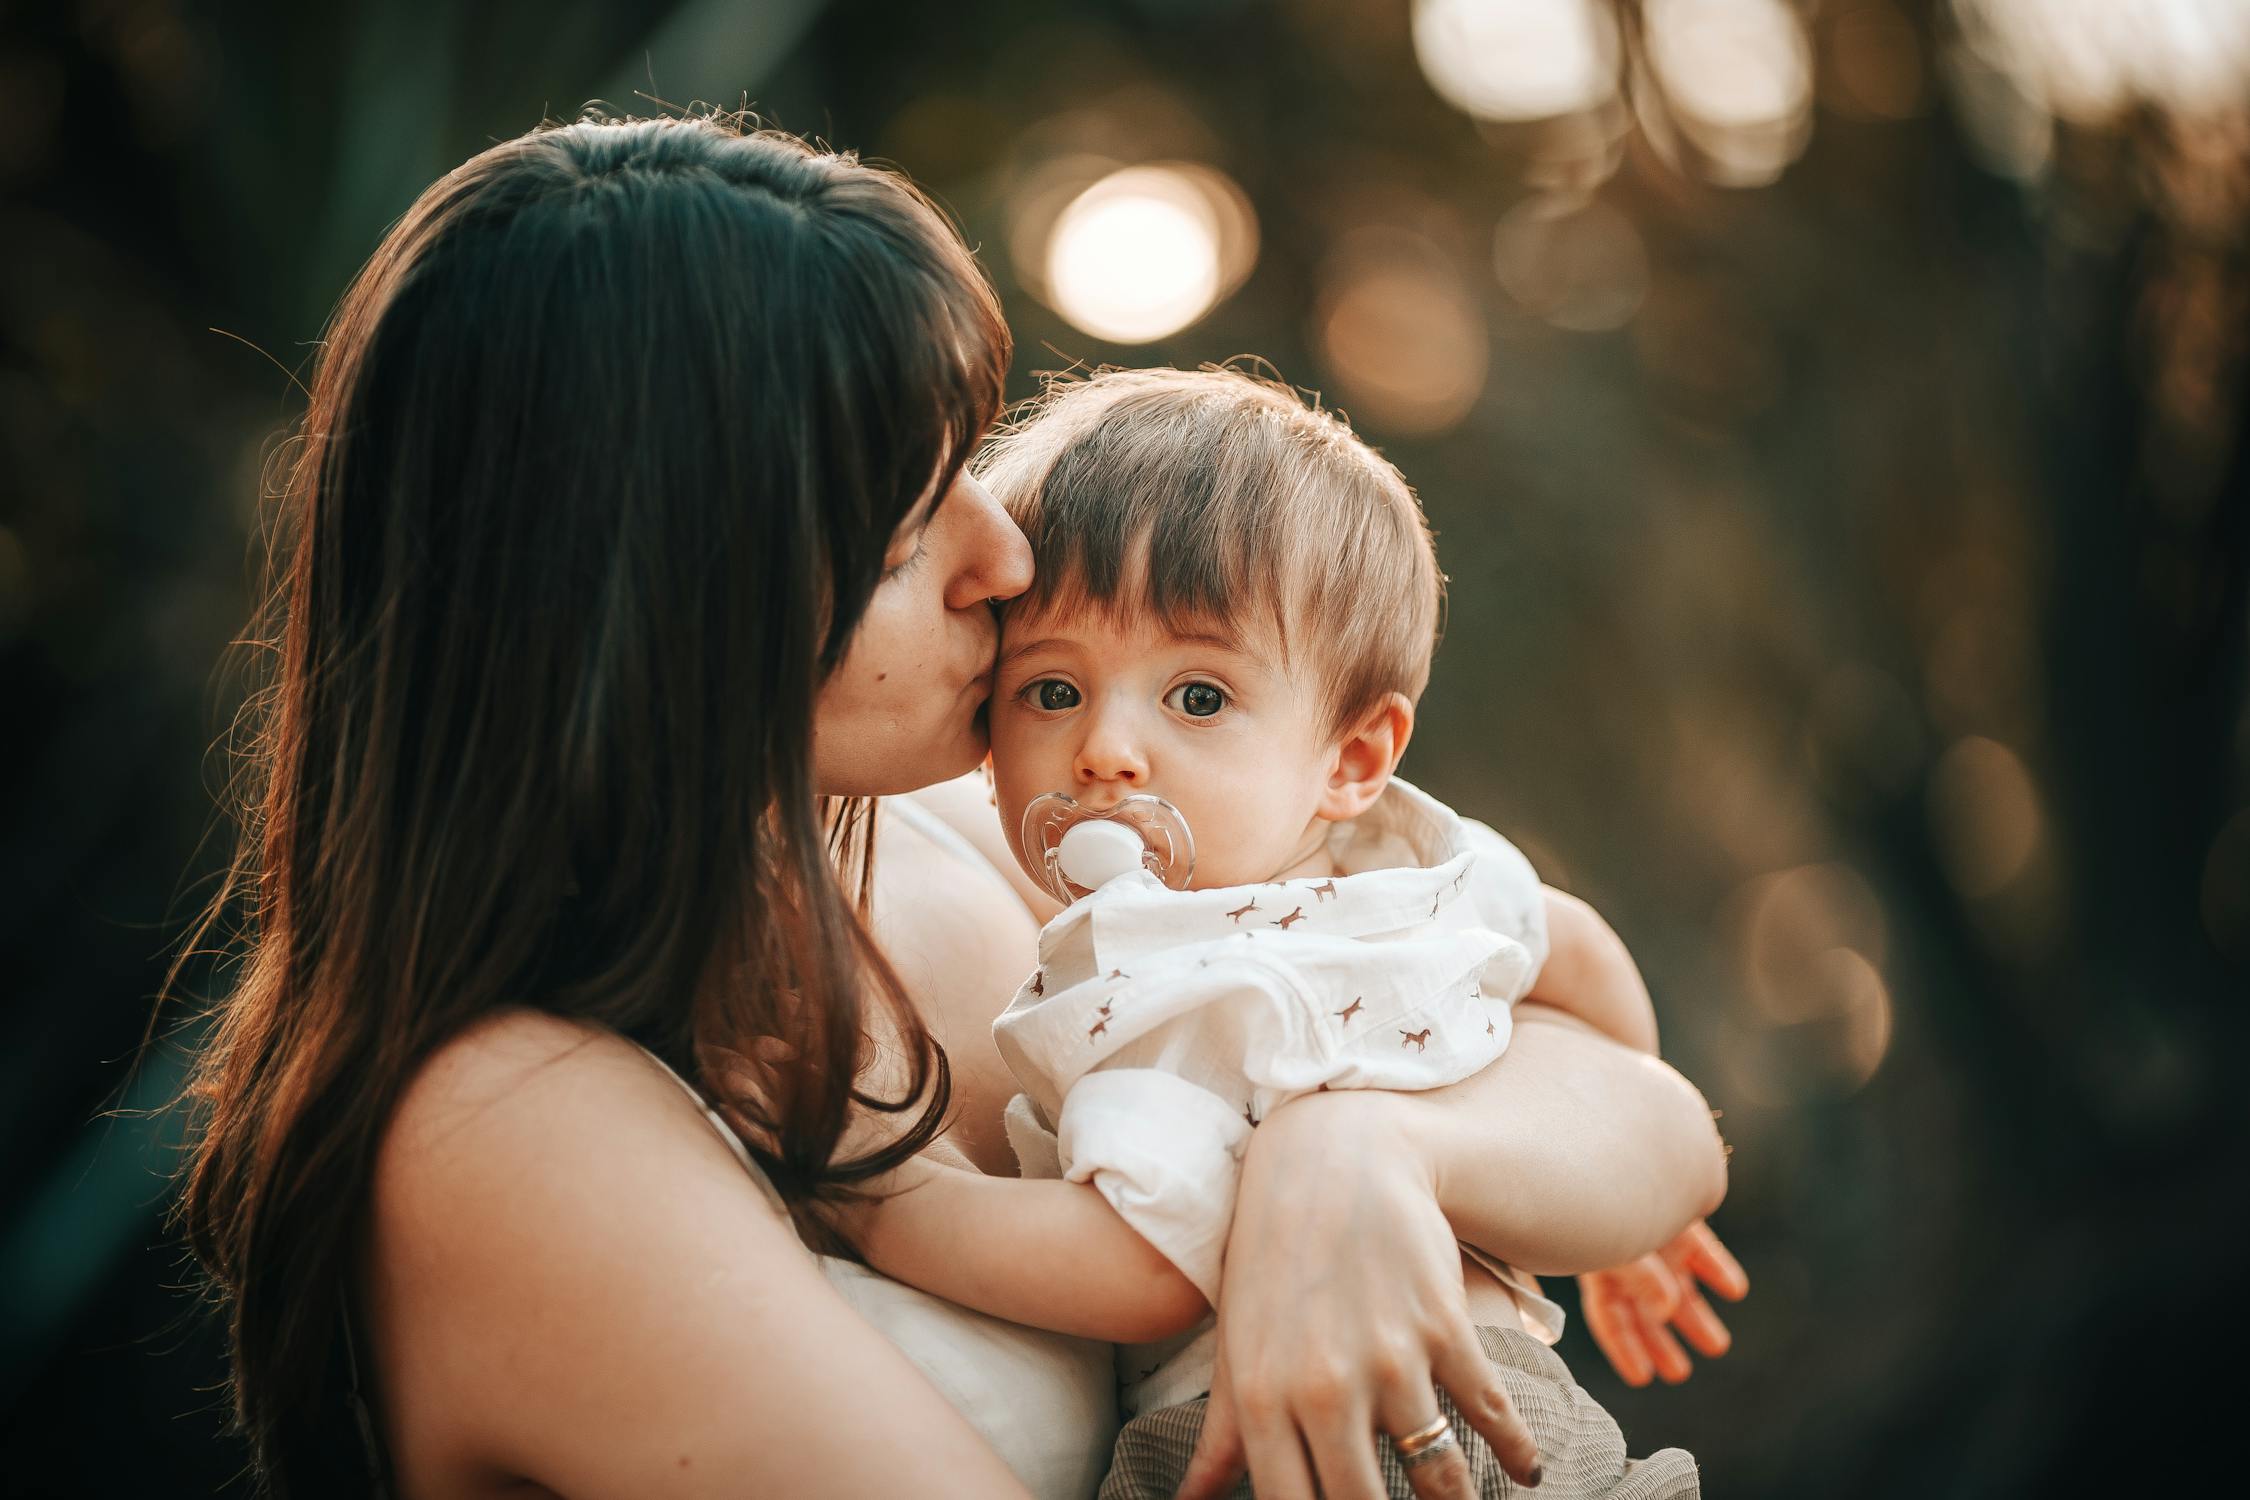 Mom Hugs and Kisses Photo by Helena Lopes from Pexels: https://www.pexels.com/photo/a-woman-kissing-her-son-8062049/